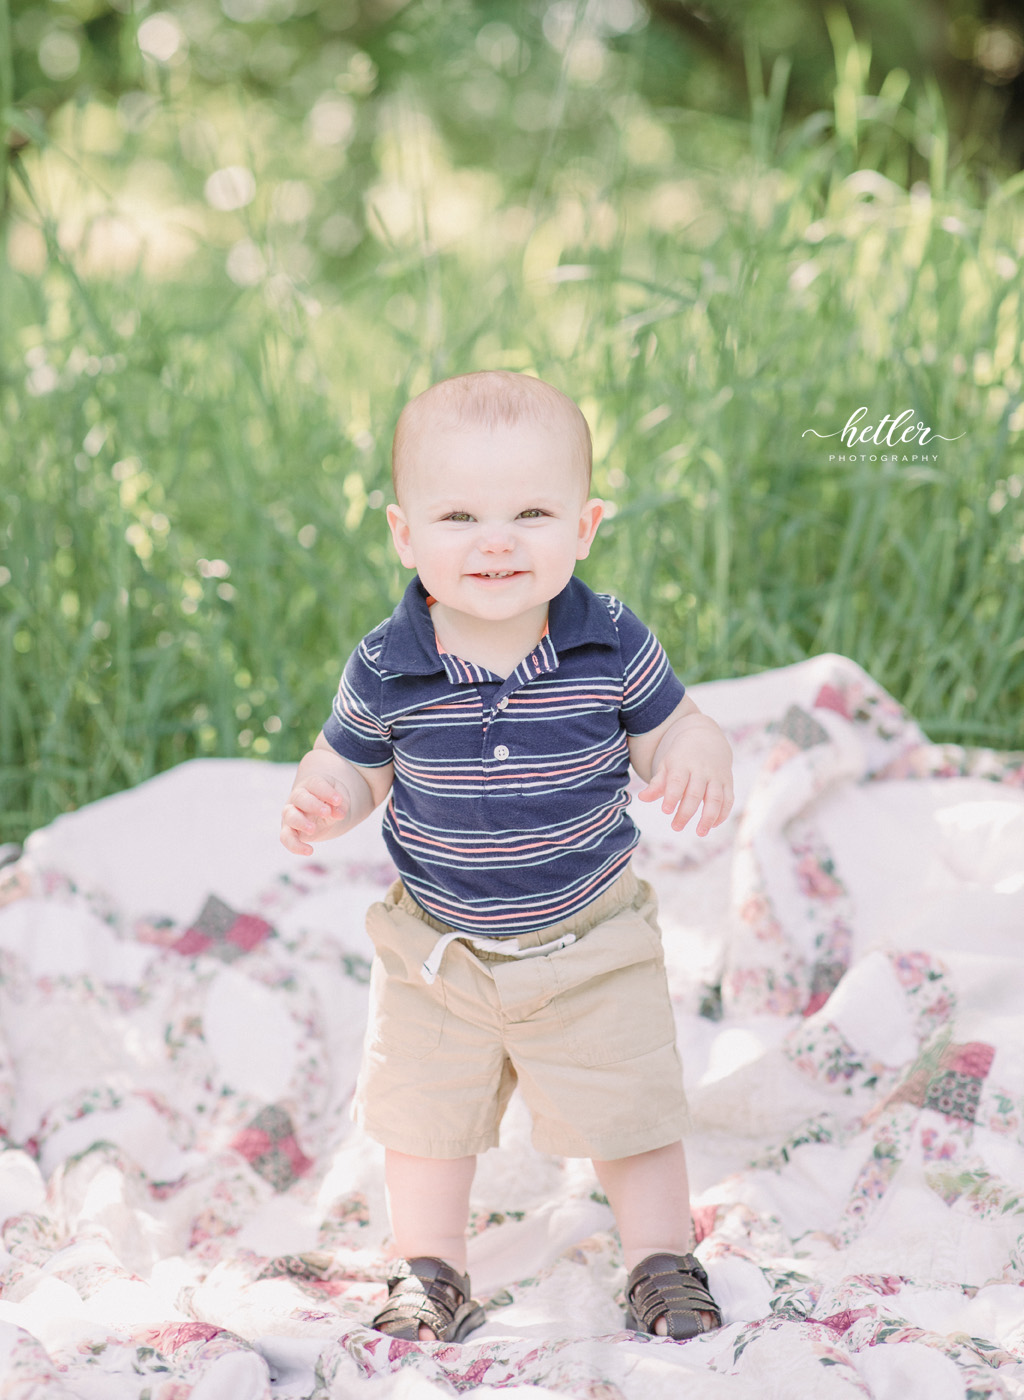 Grand Rapids light and airy family photography